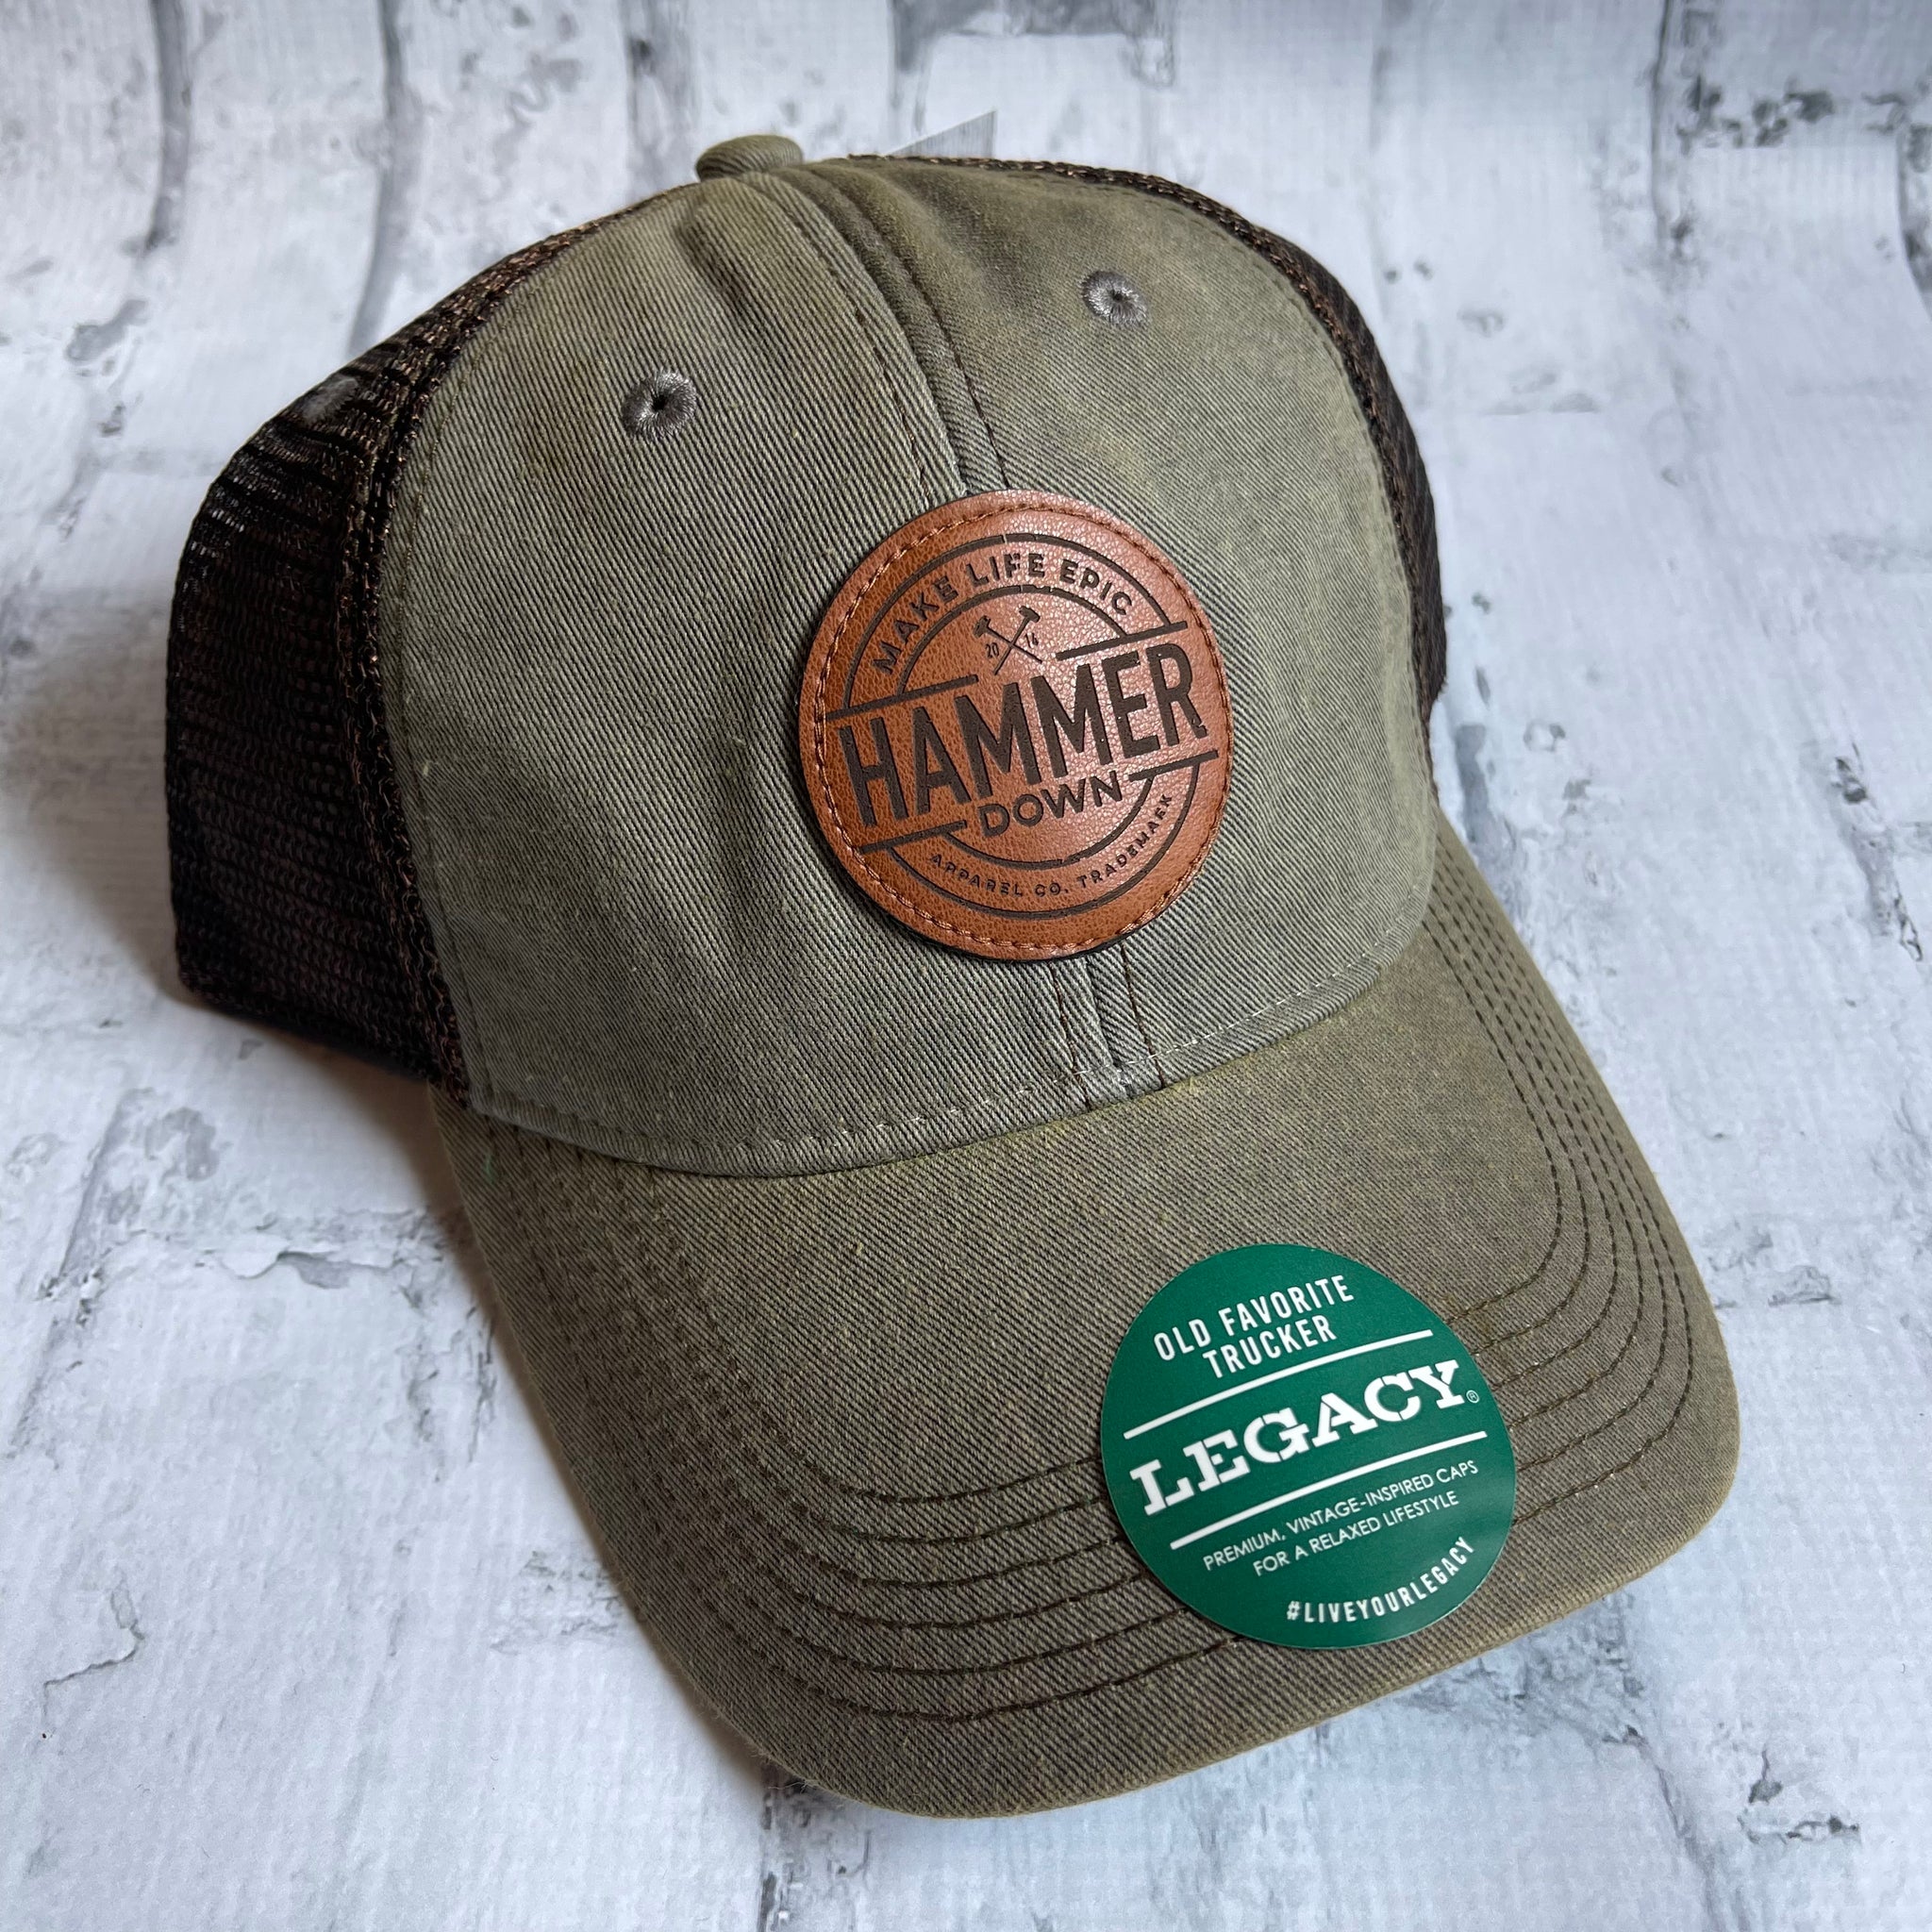 Hammer Down "MLE Badge" Hat - Loden with Leather Patch - Southern Charm "Shop The Charm"